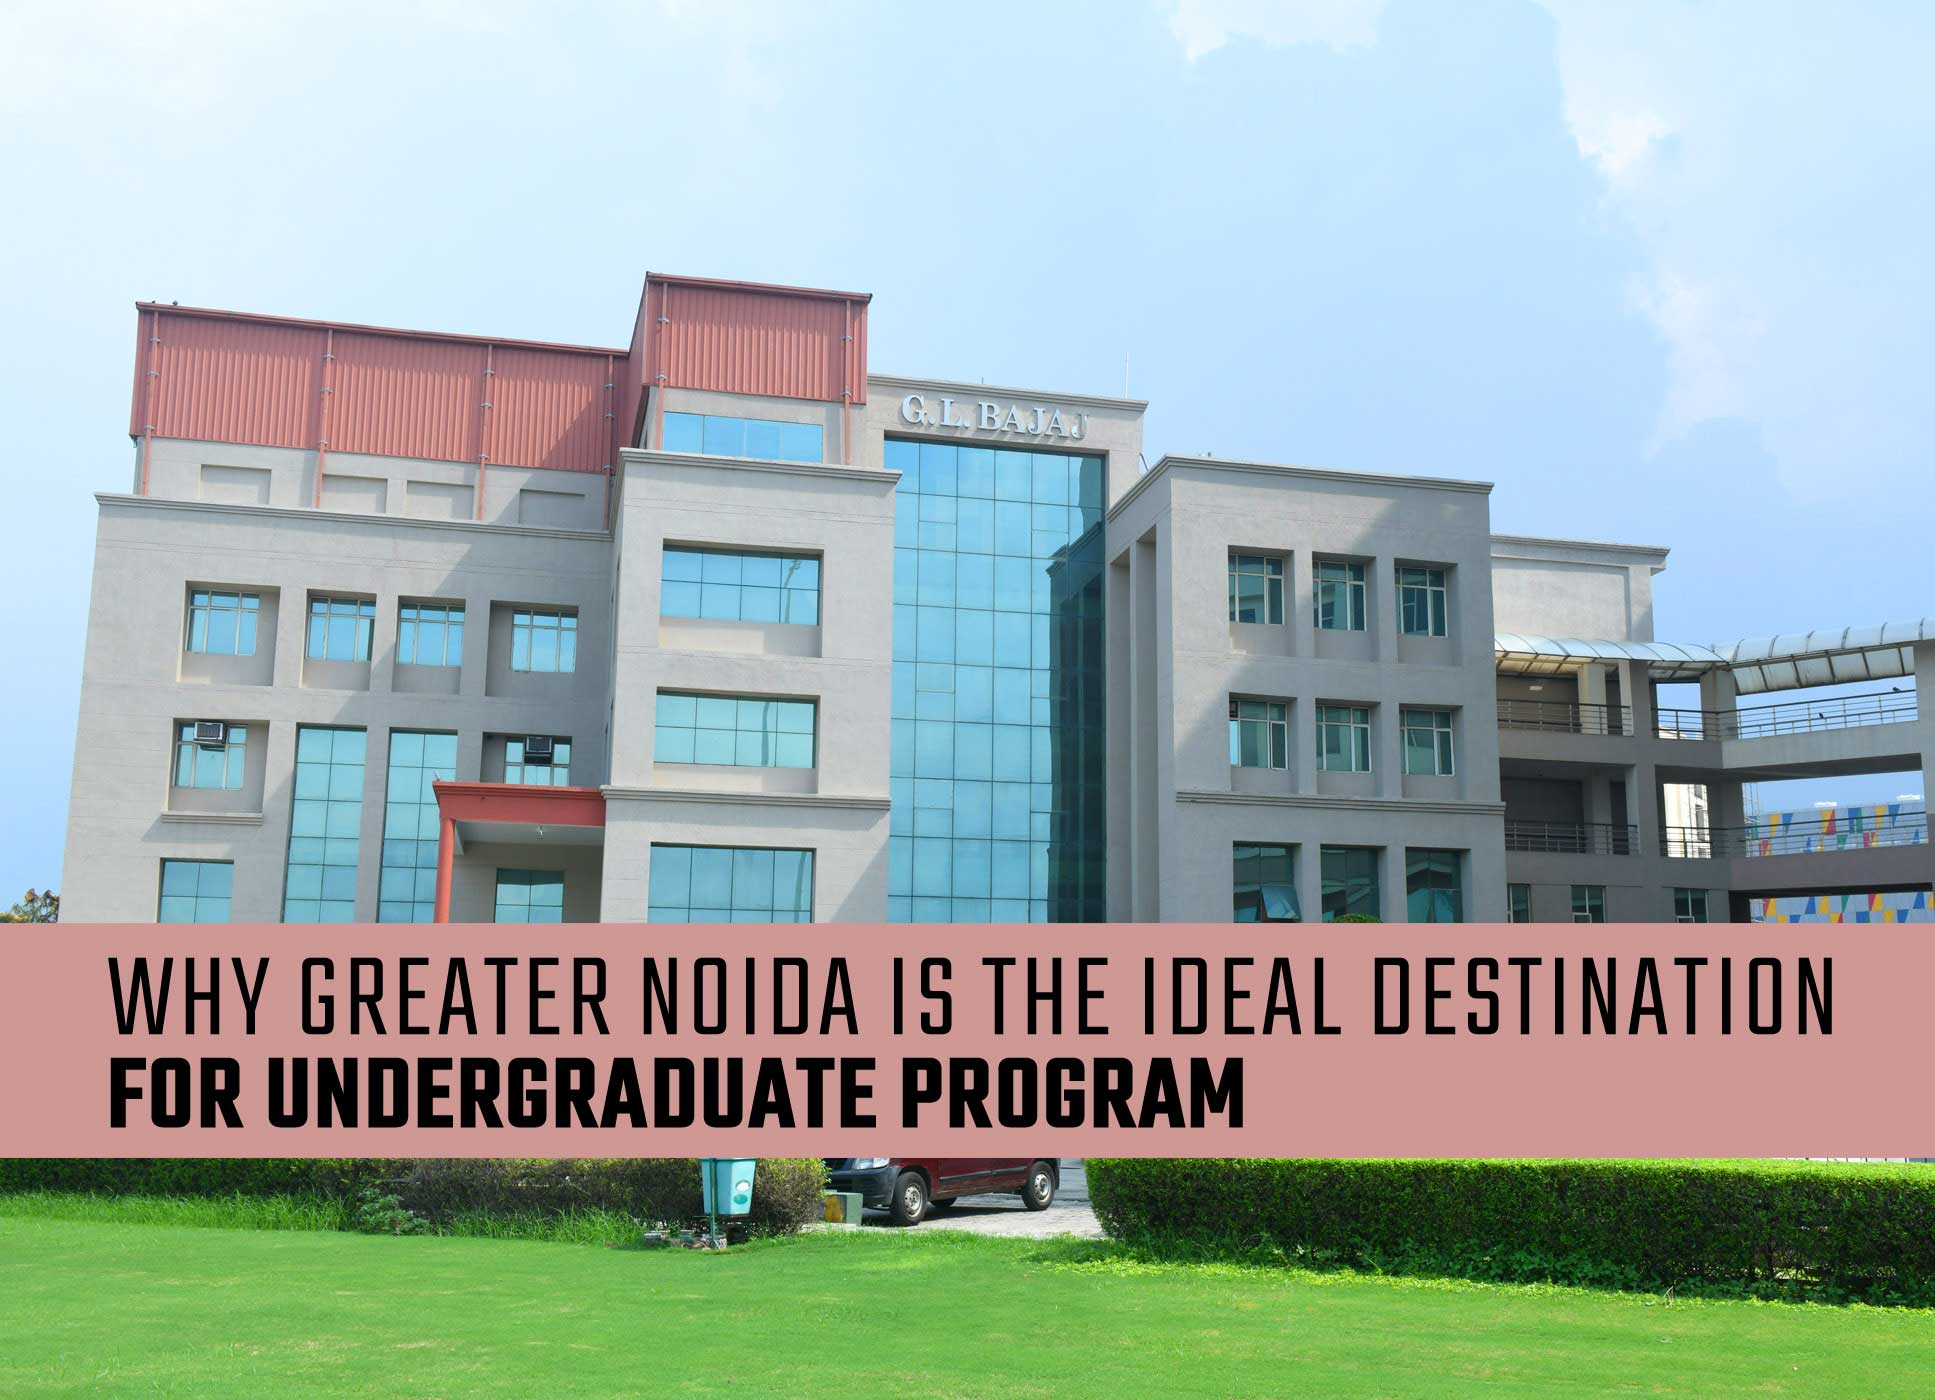 Why Greater Noida is the ideal destination for Undergraduate Program